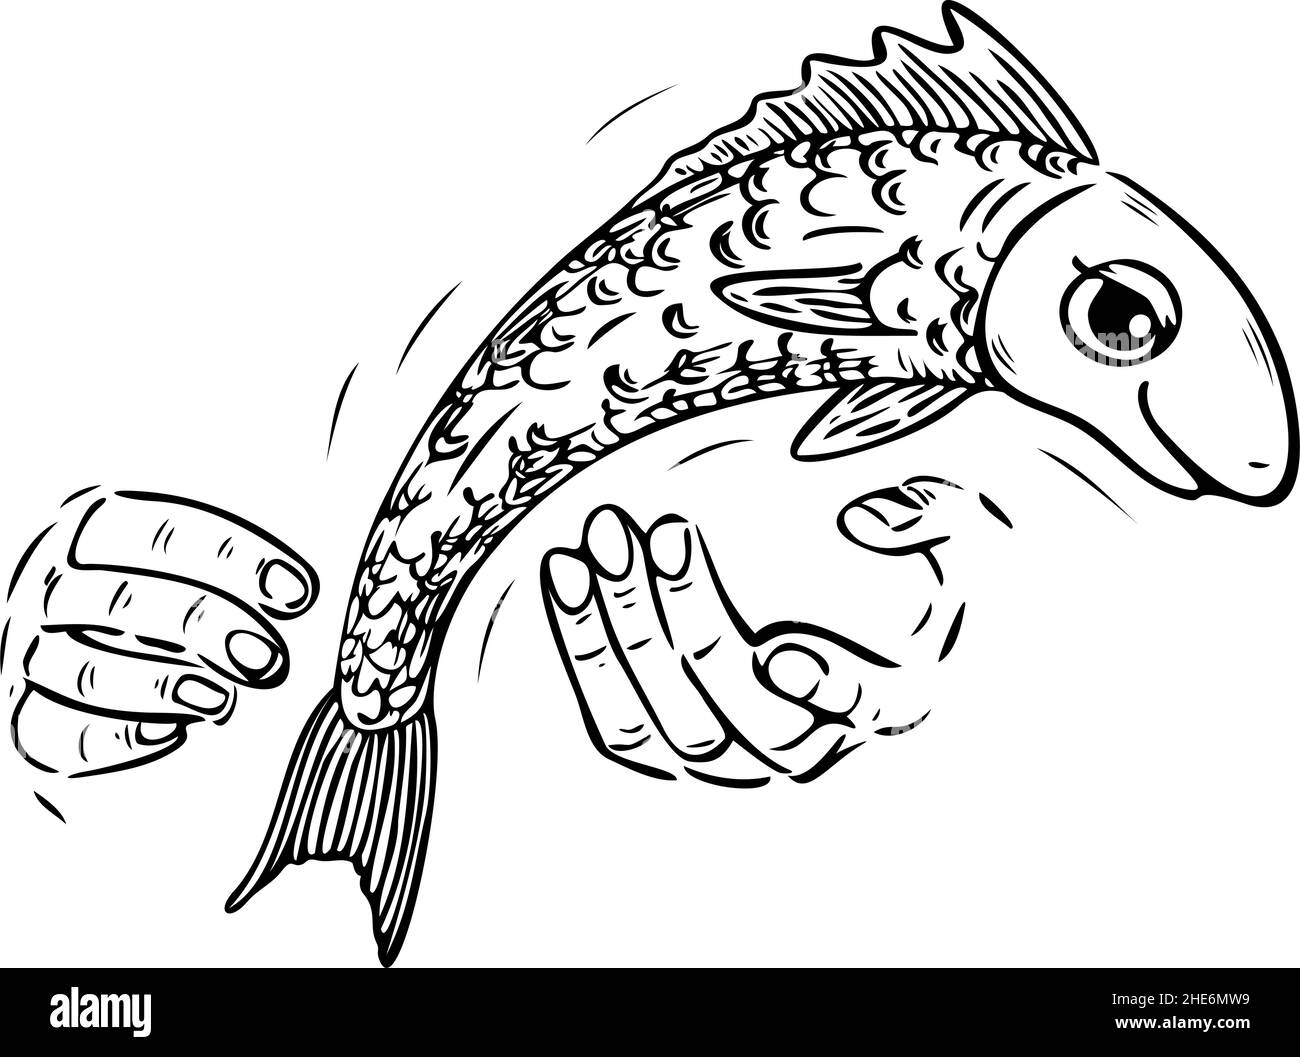 Vector illustration with fish slipping out of fisherman's hands. Black and white illustration of escaping fish. Stock Vector